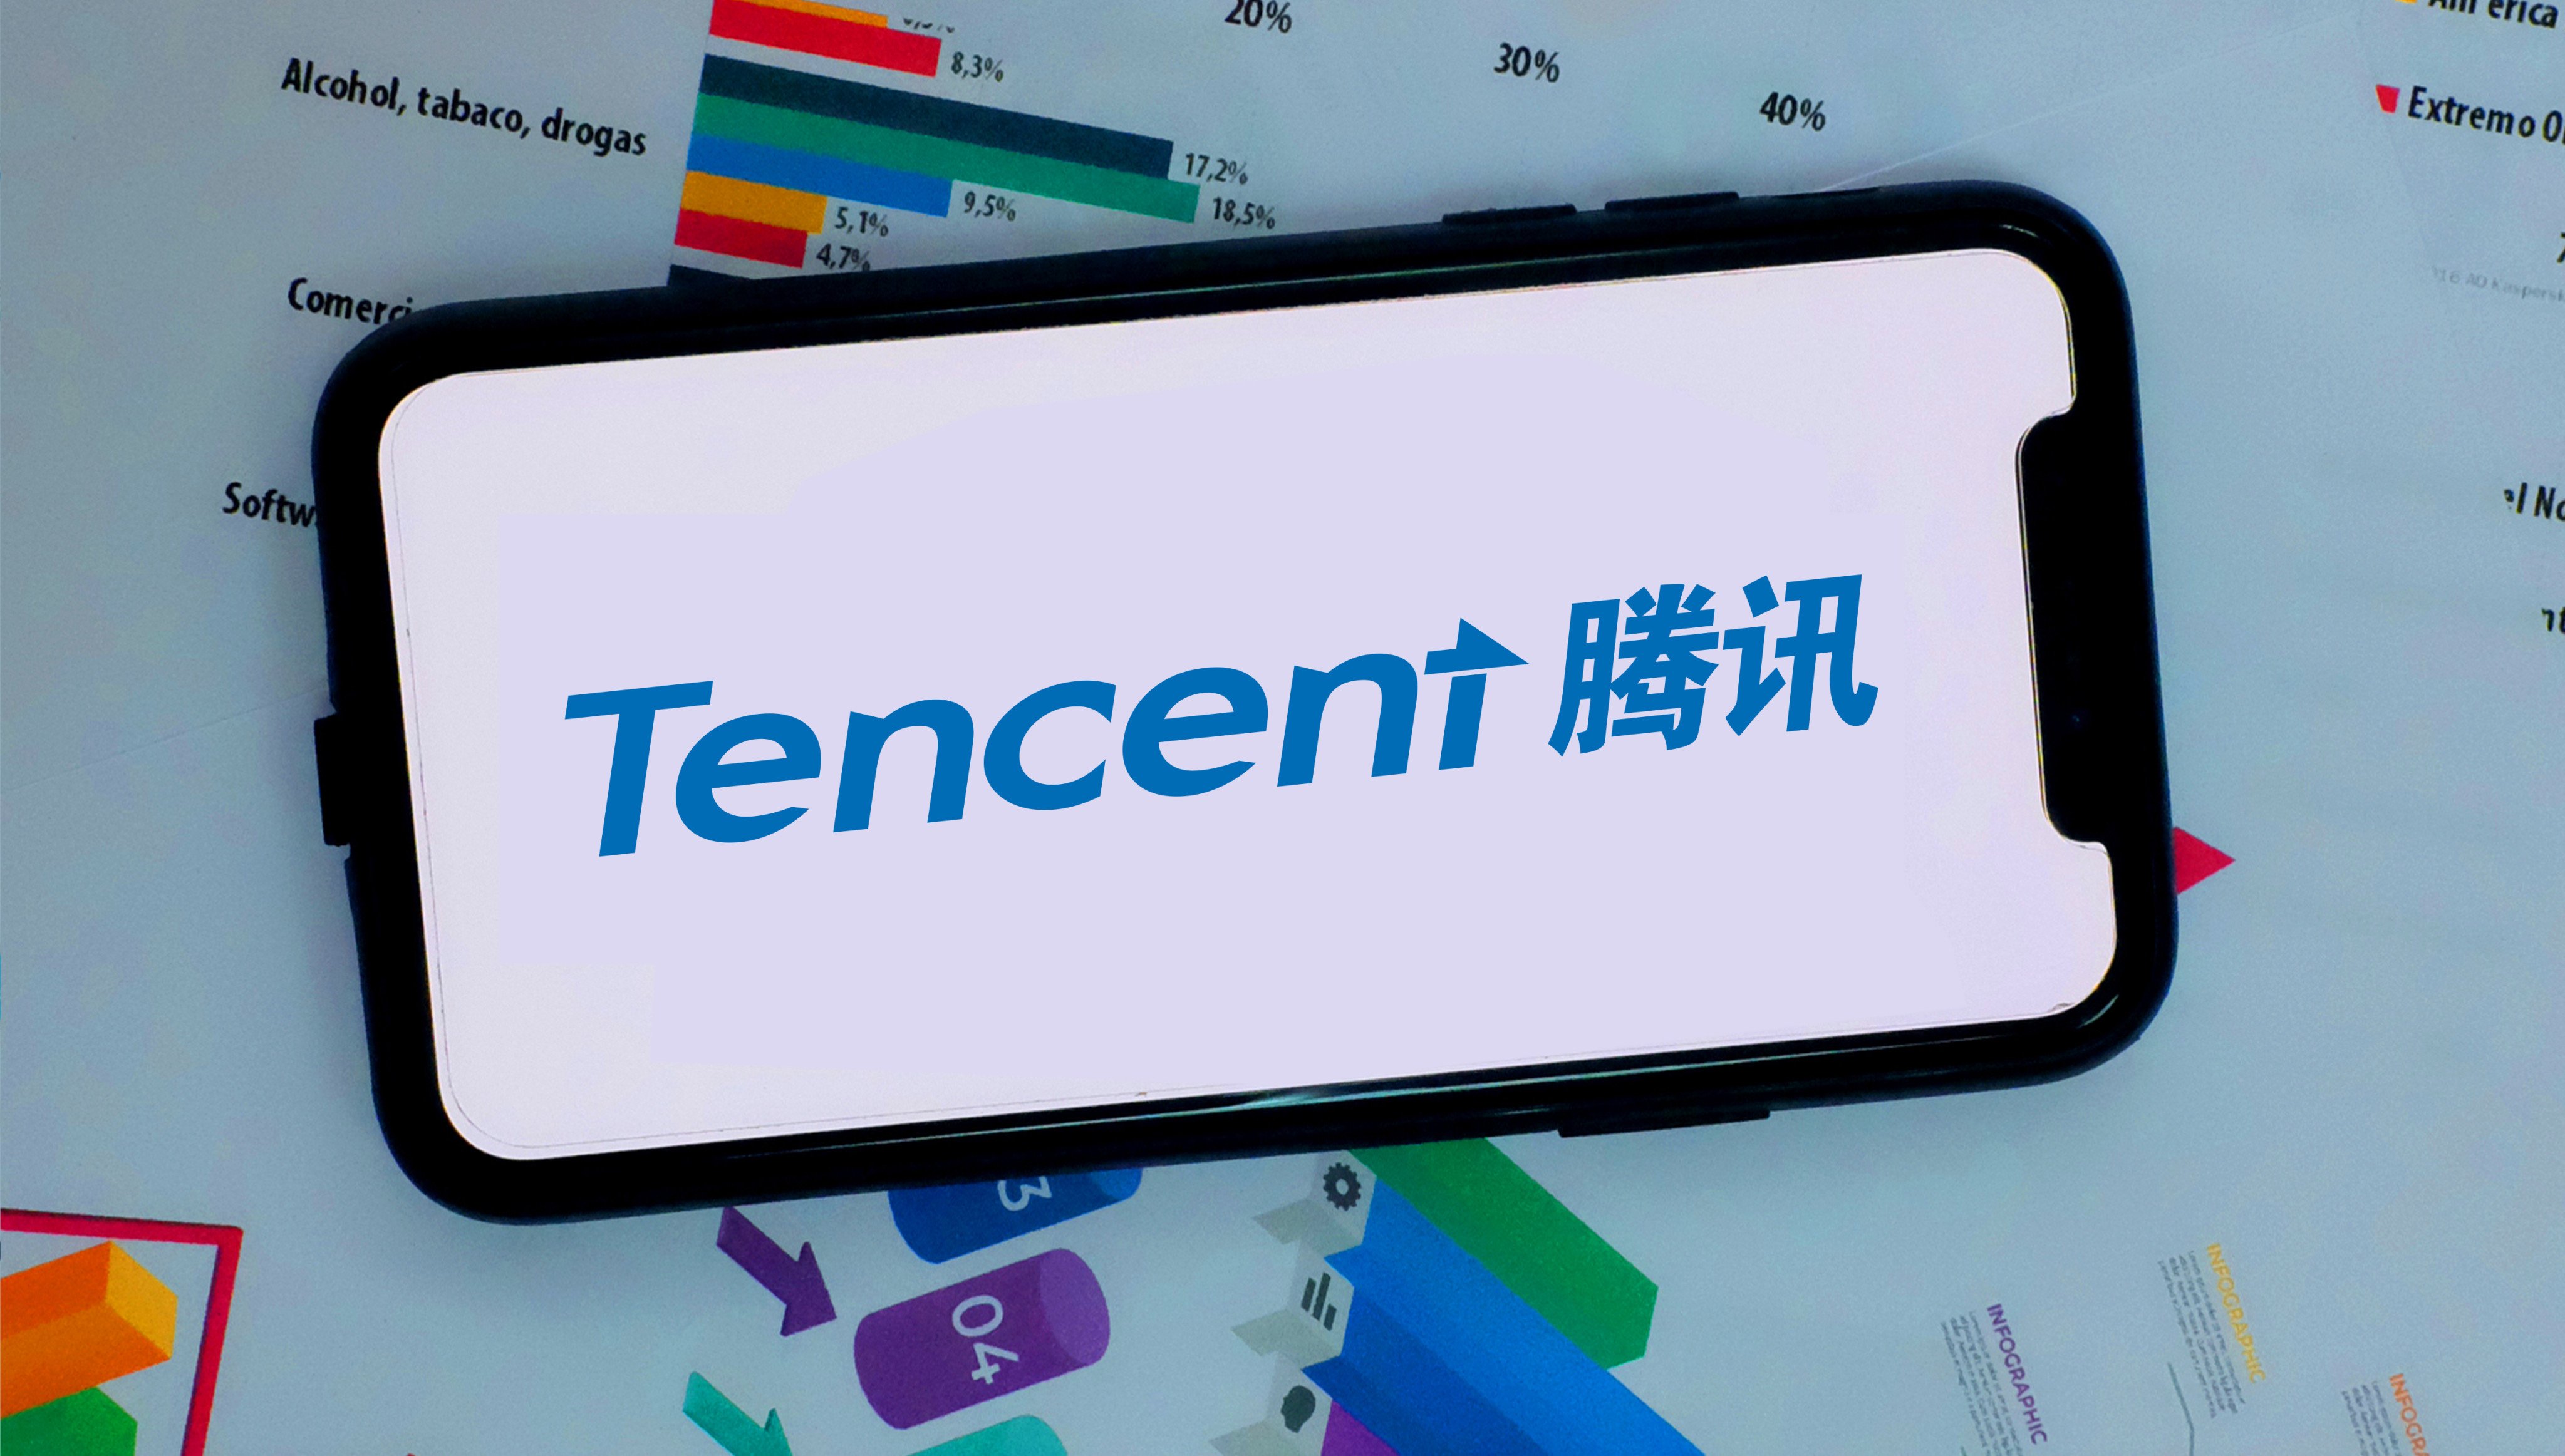 Tencent Holdings’ launch of Yuanbao shows its confidence to somehow close the gap with Chinese tech firms’ that have had a head start in building ChatGPT-like services. Photo: Shutterstock